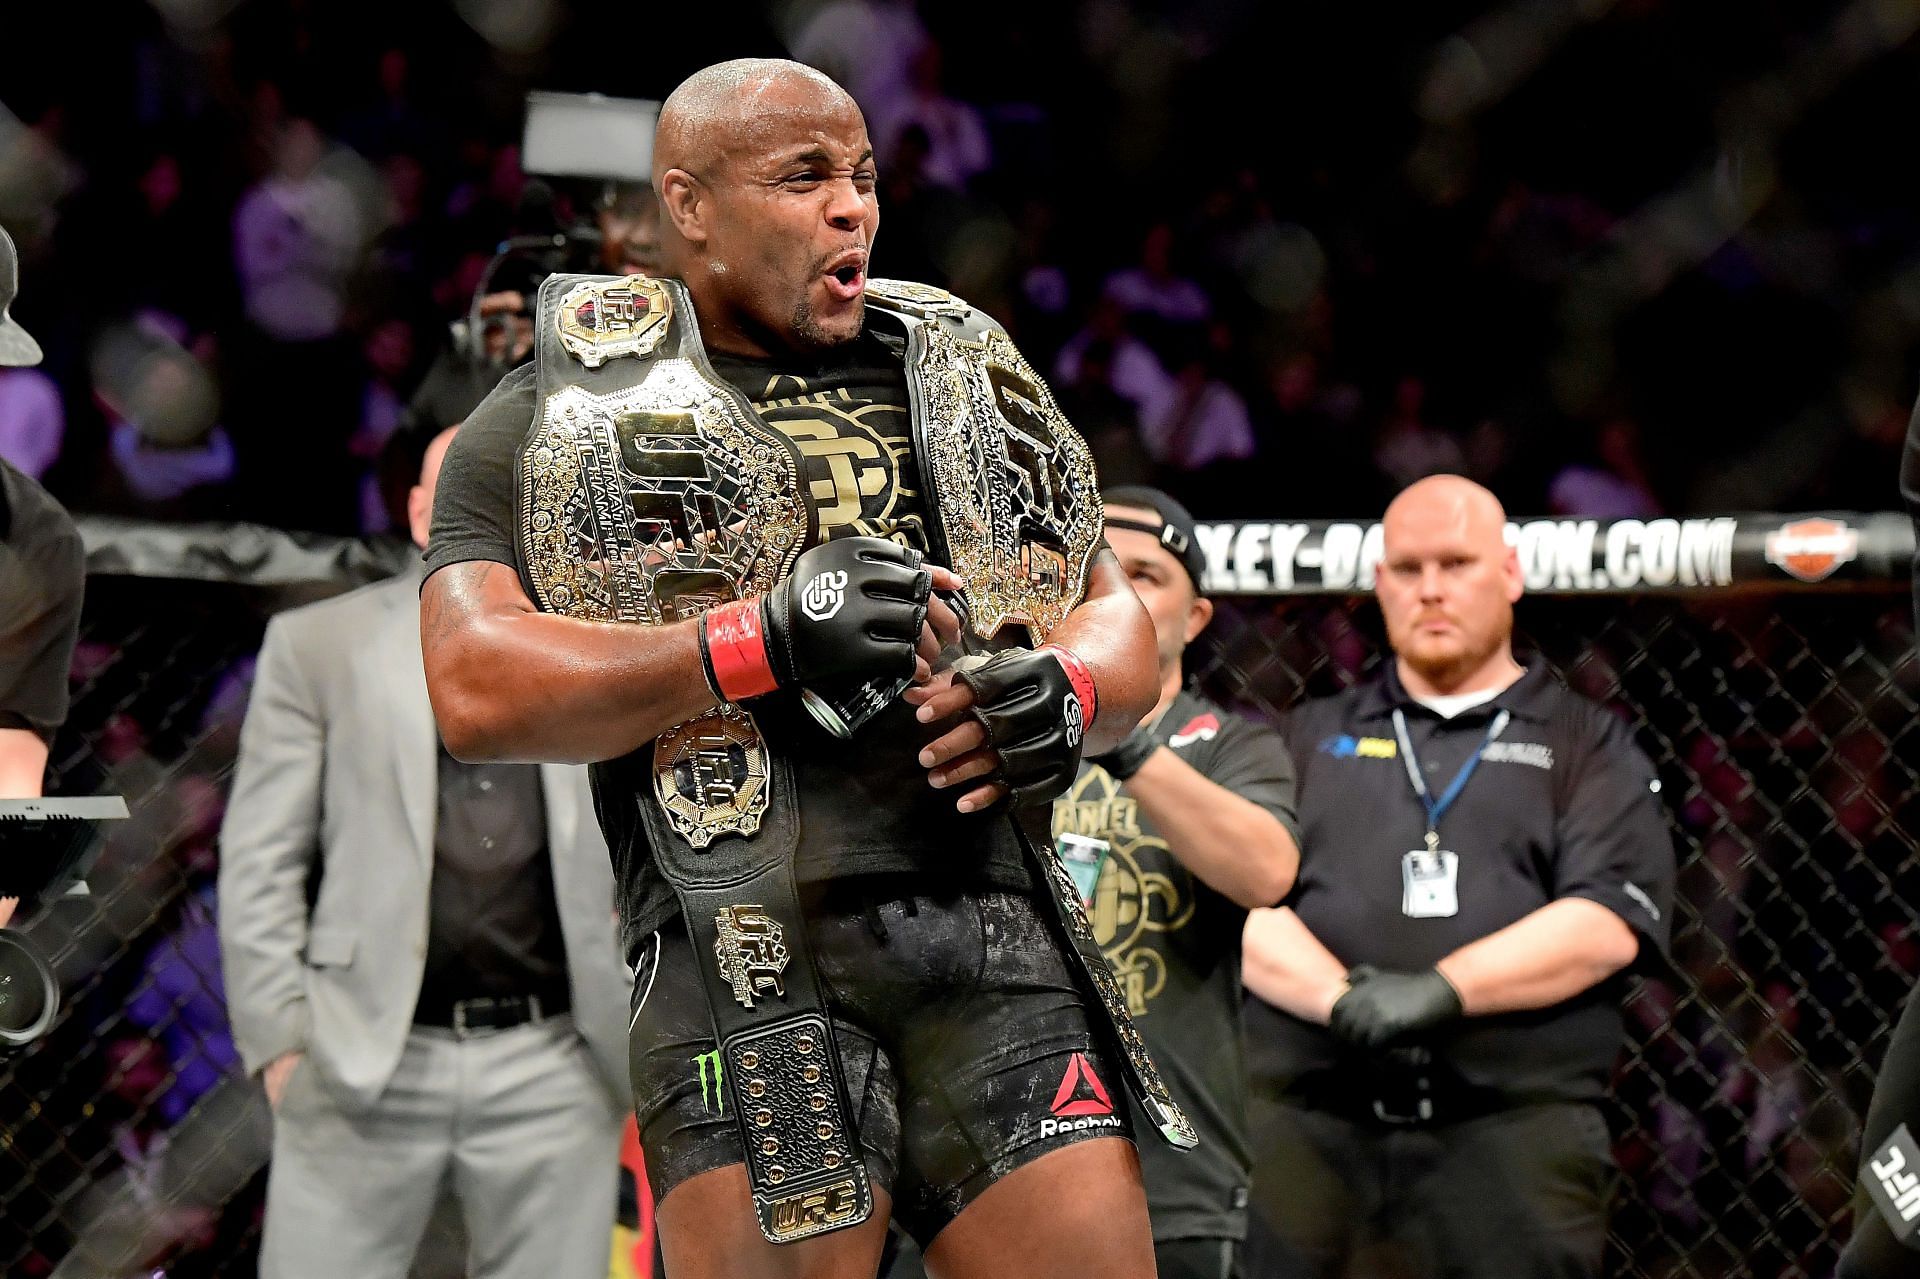 There is an argument that Daniel Cormier should be ahead of Jon Jones in the GOAT debate